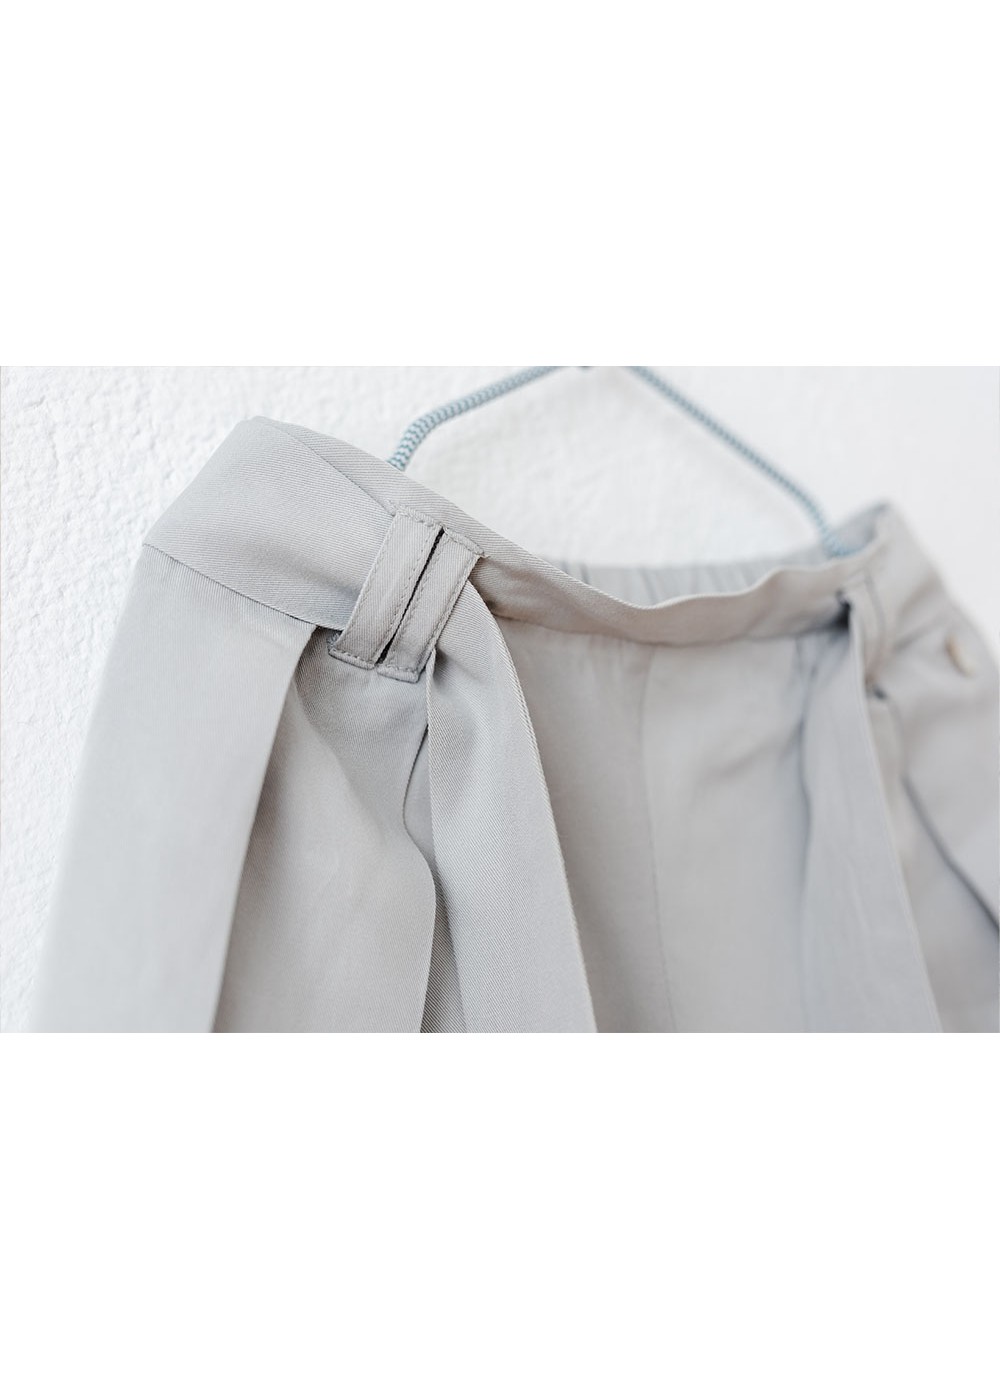 PEARL LOOSE-FITTING LYOCELL TROUSERS